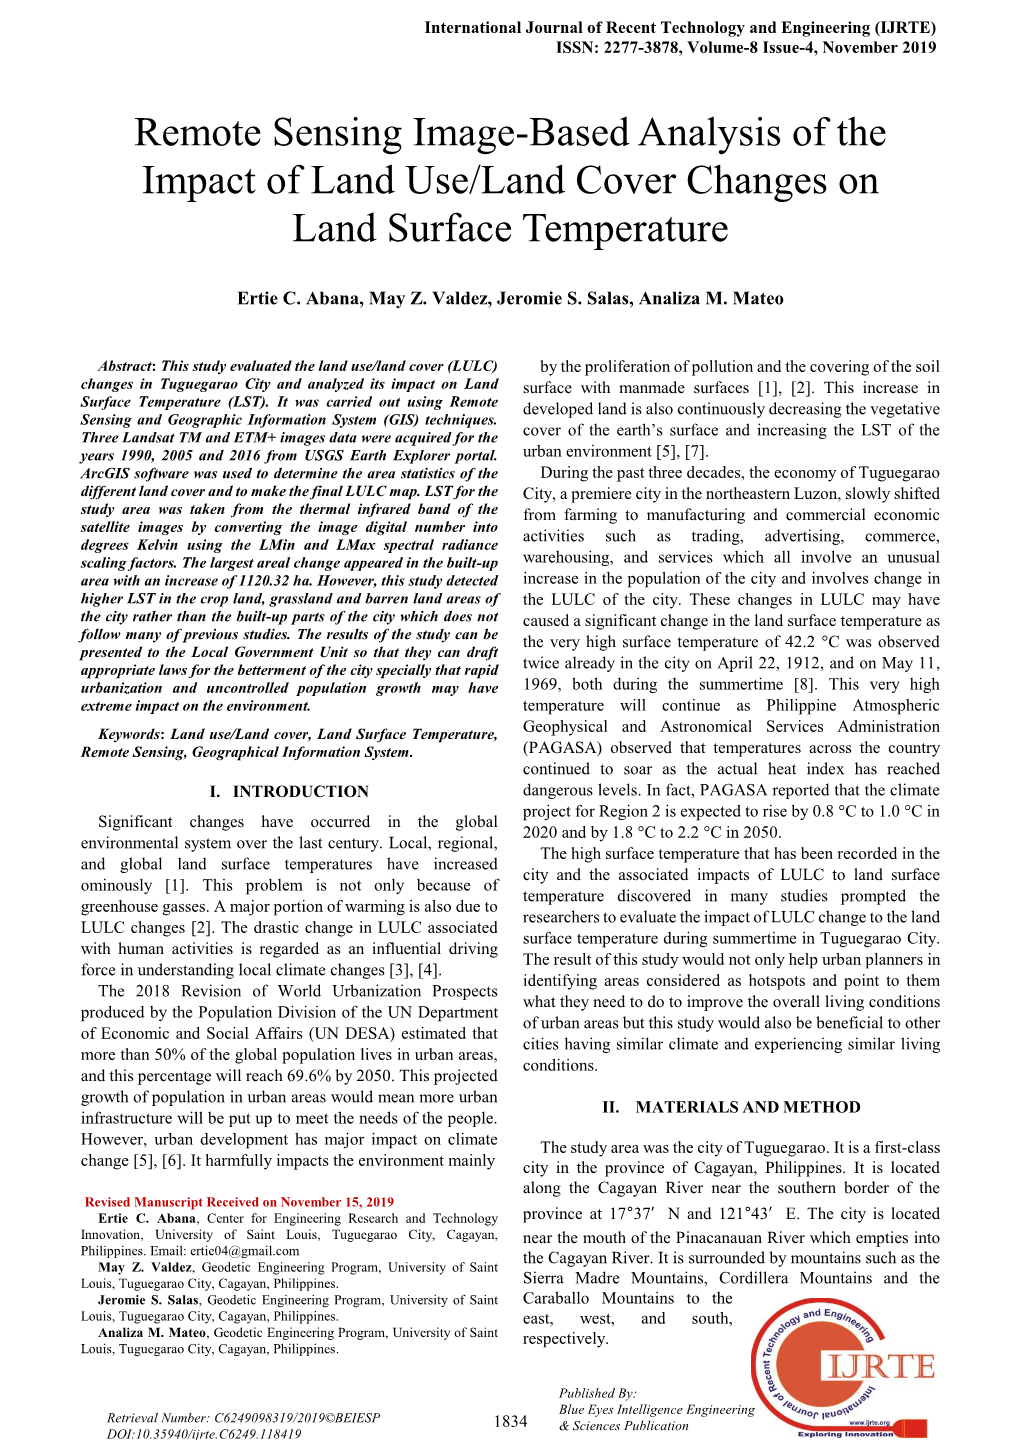 Remote Sensing Image-Based Analysis of the Impact of Land Use/Land Cover Changes on Land Surface Temperature